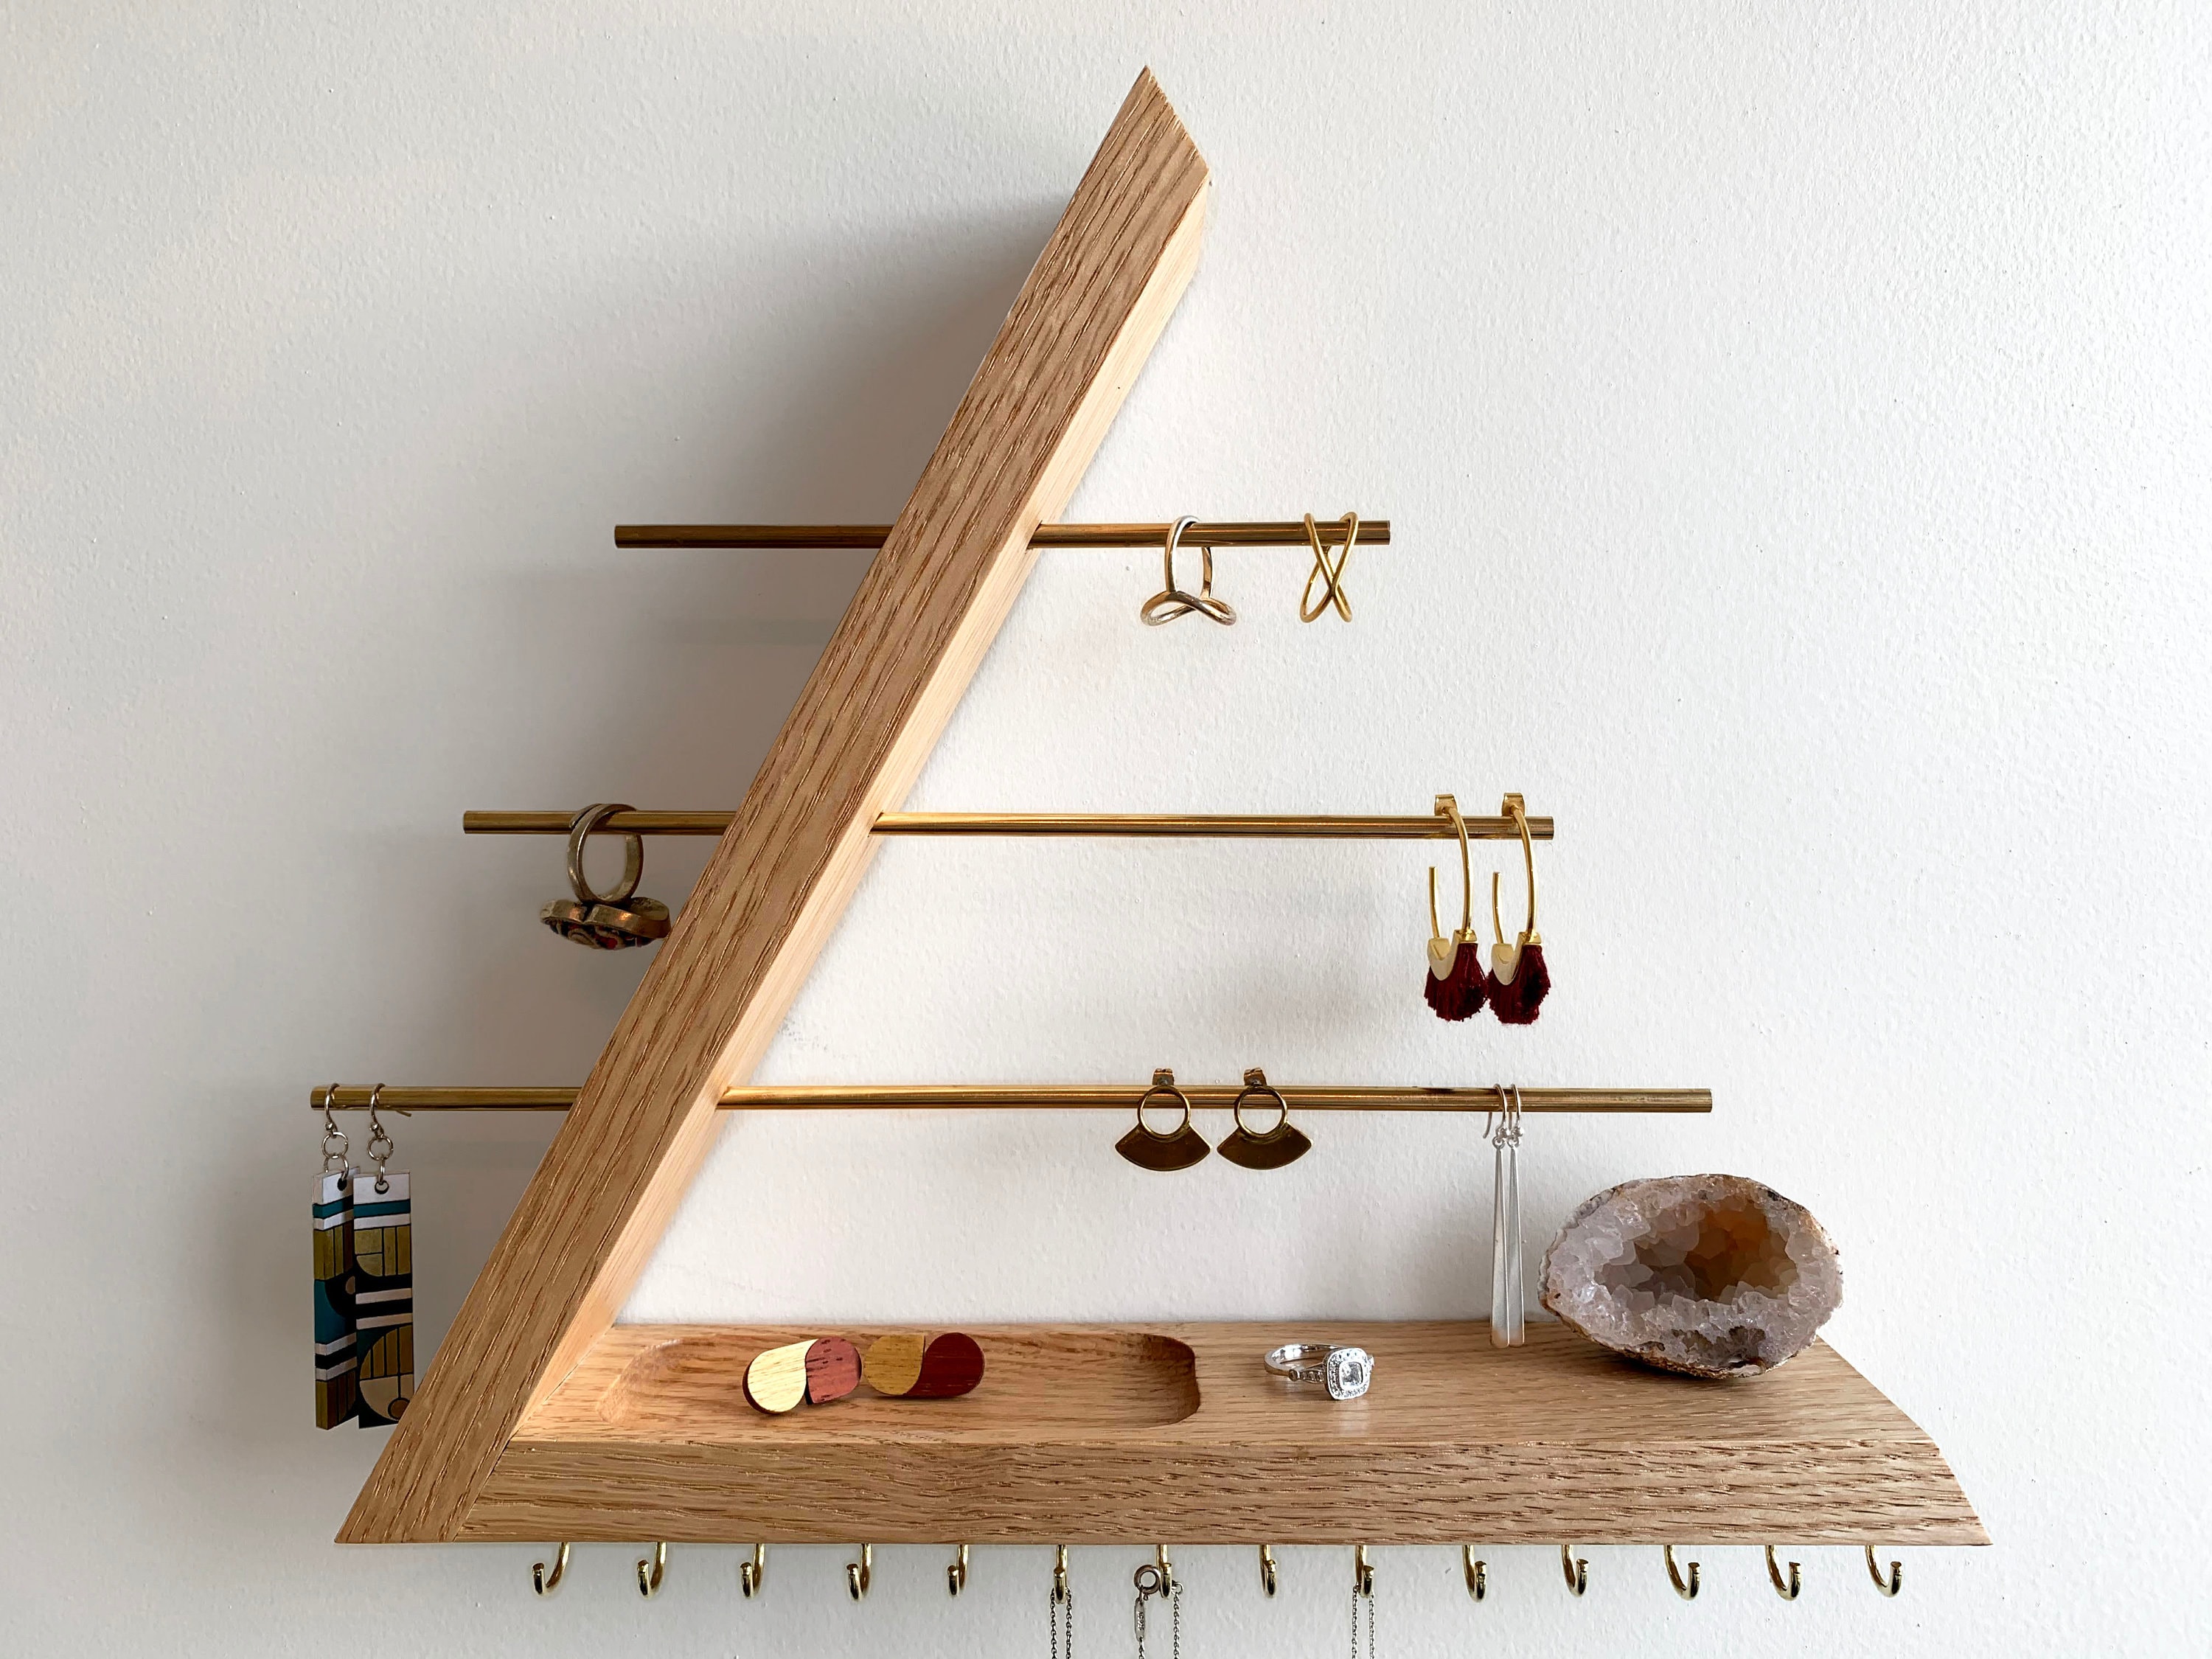 geneic Wooden Wall Mounted Jewelry Display Organizer Hook Holder for Necklace Earrings Ring Scarf Hangers Rack 